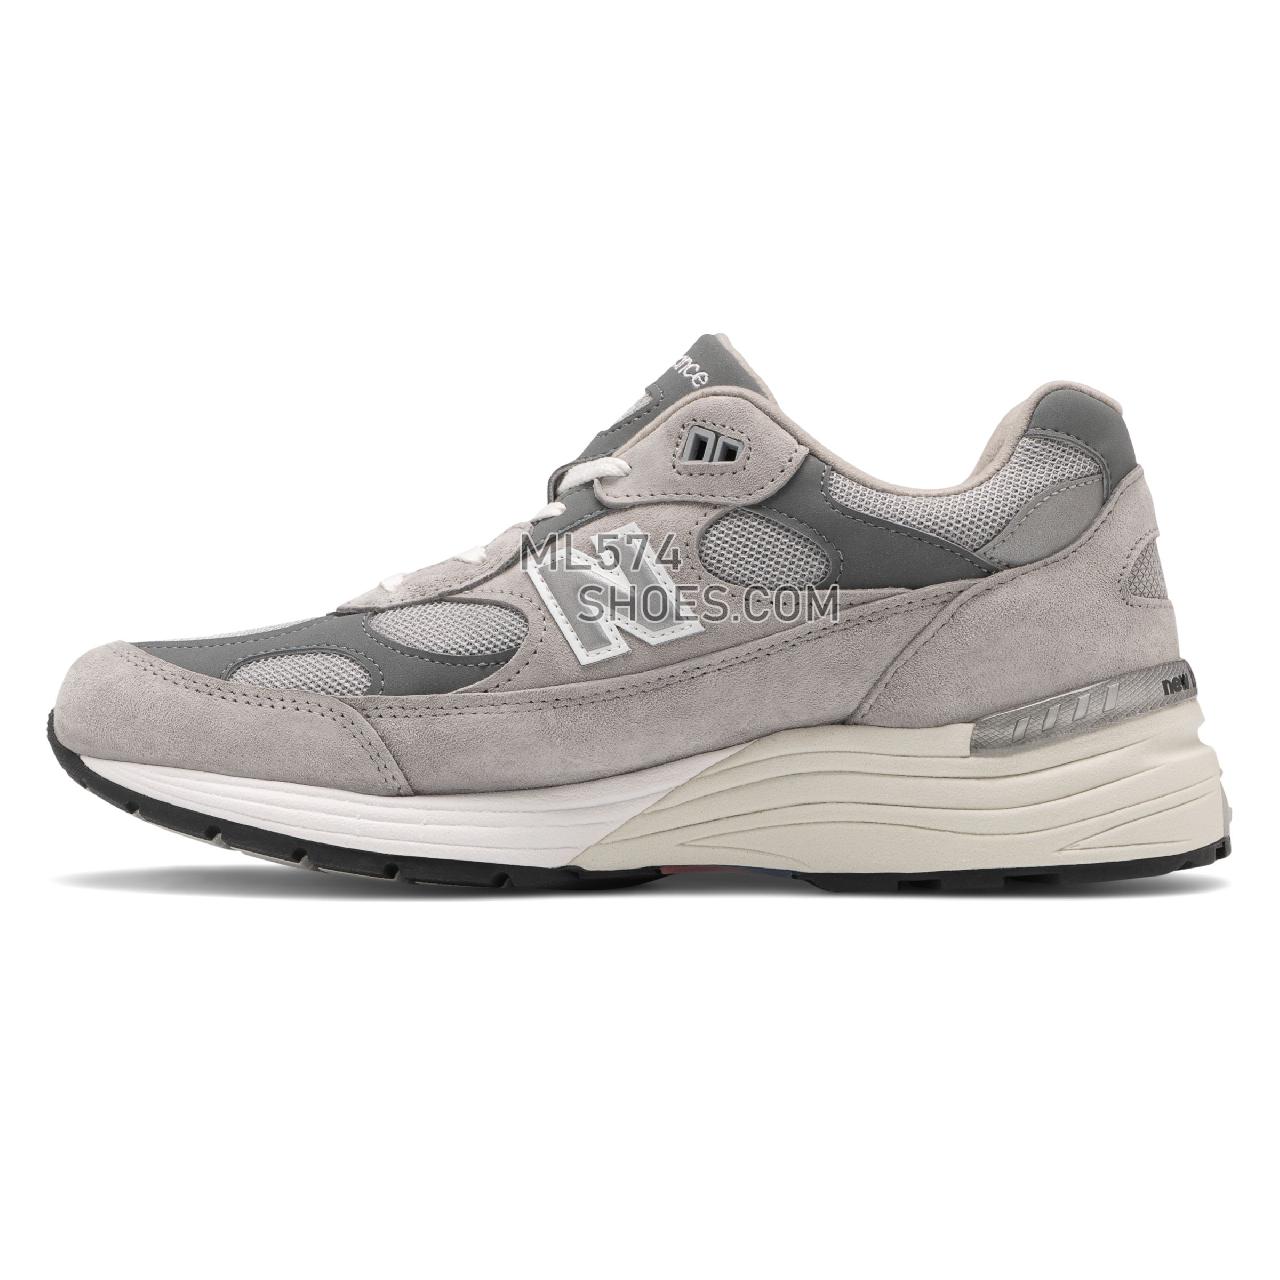 New Balance Made in US 992 - Men's Made in US 992 Classic - Grey with White - M992GR